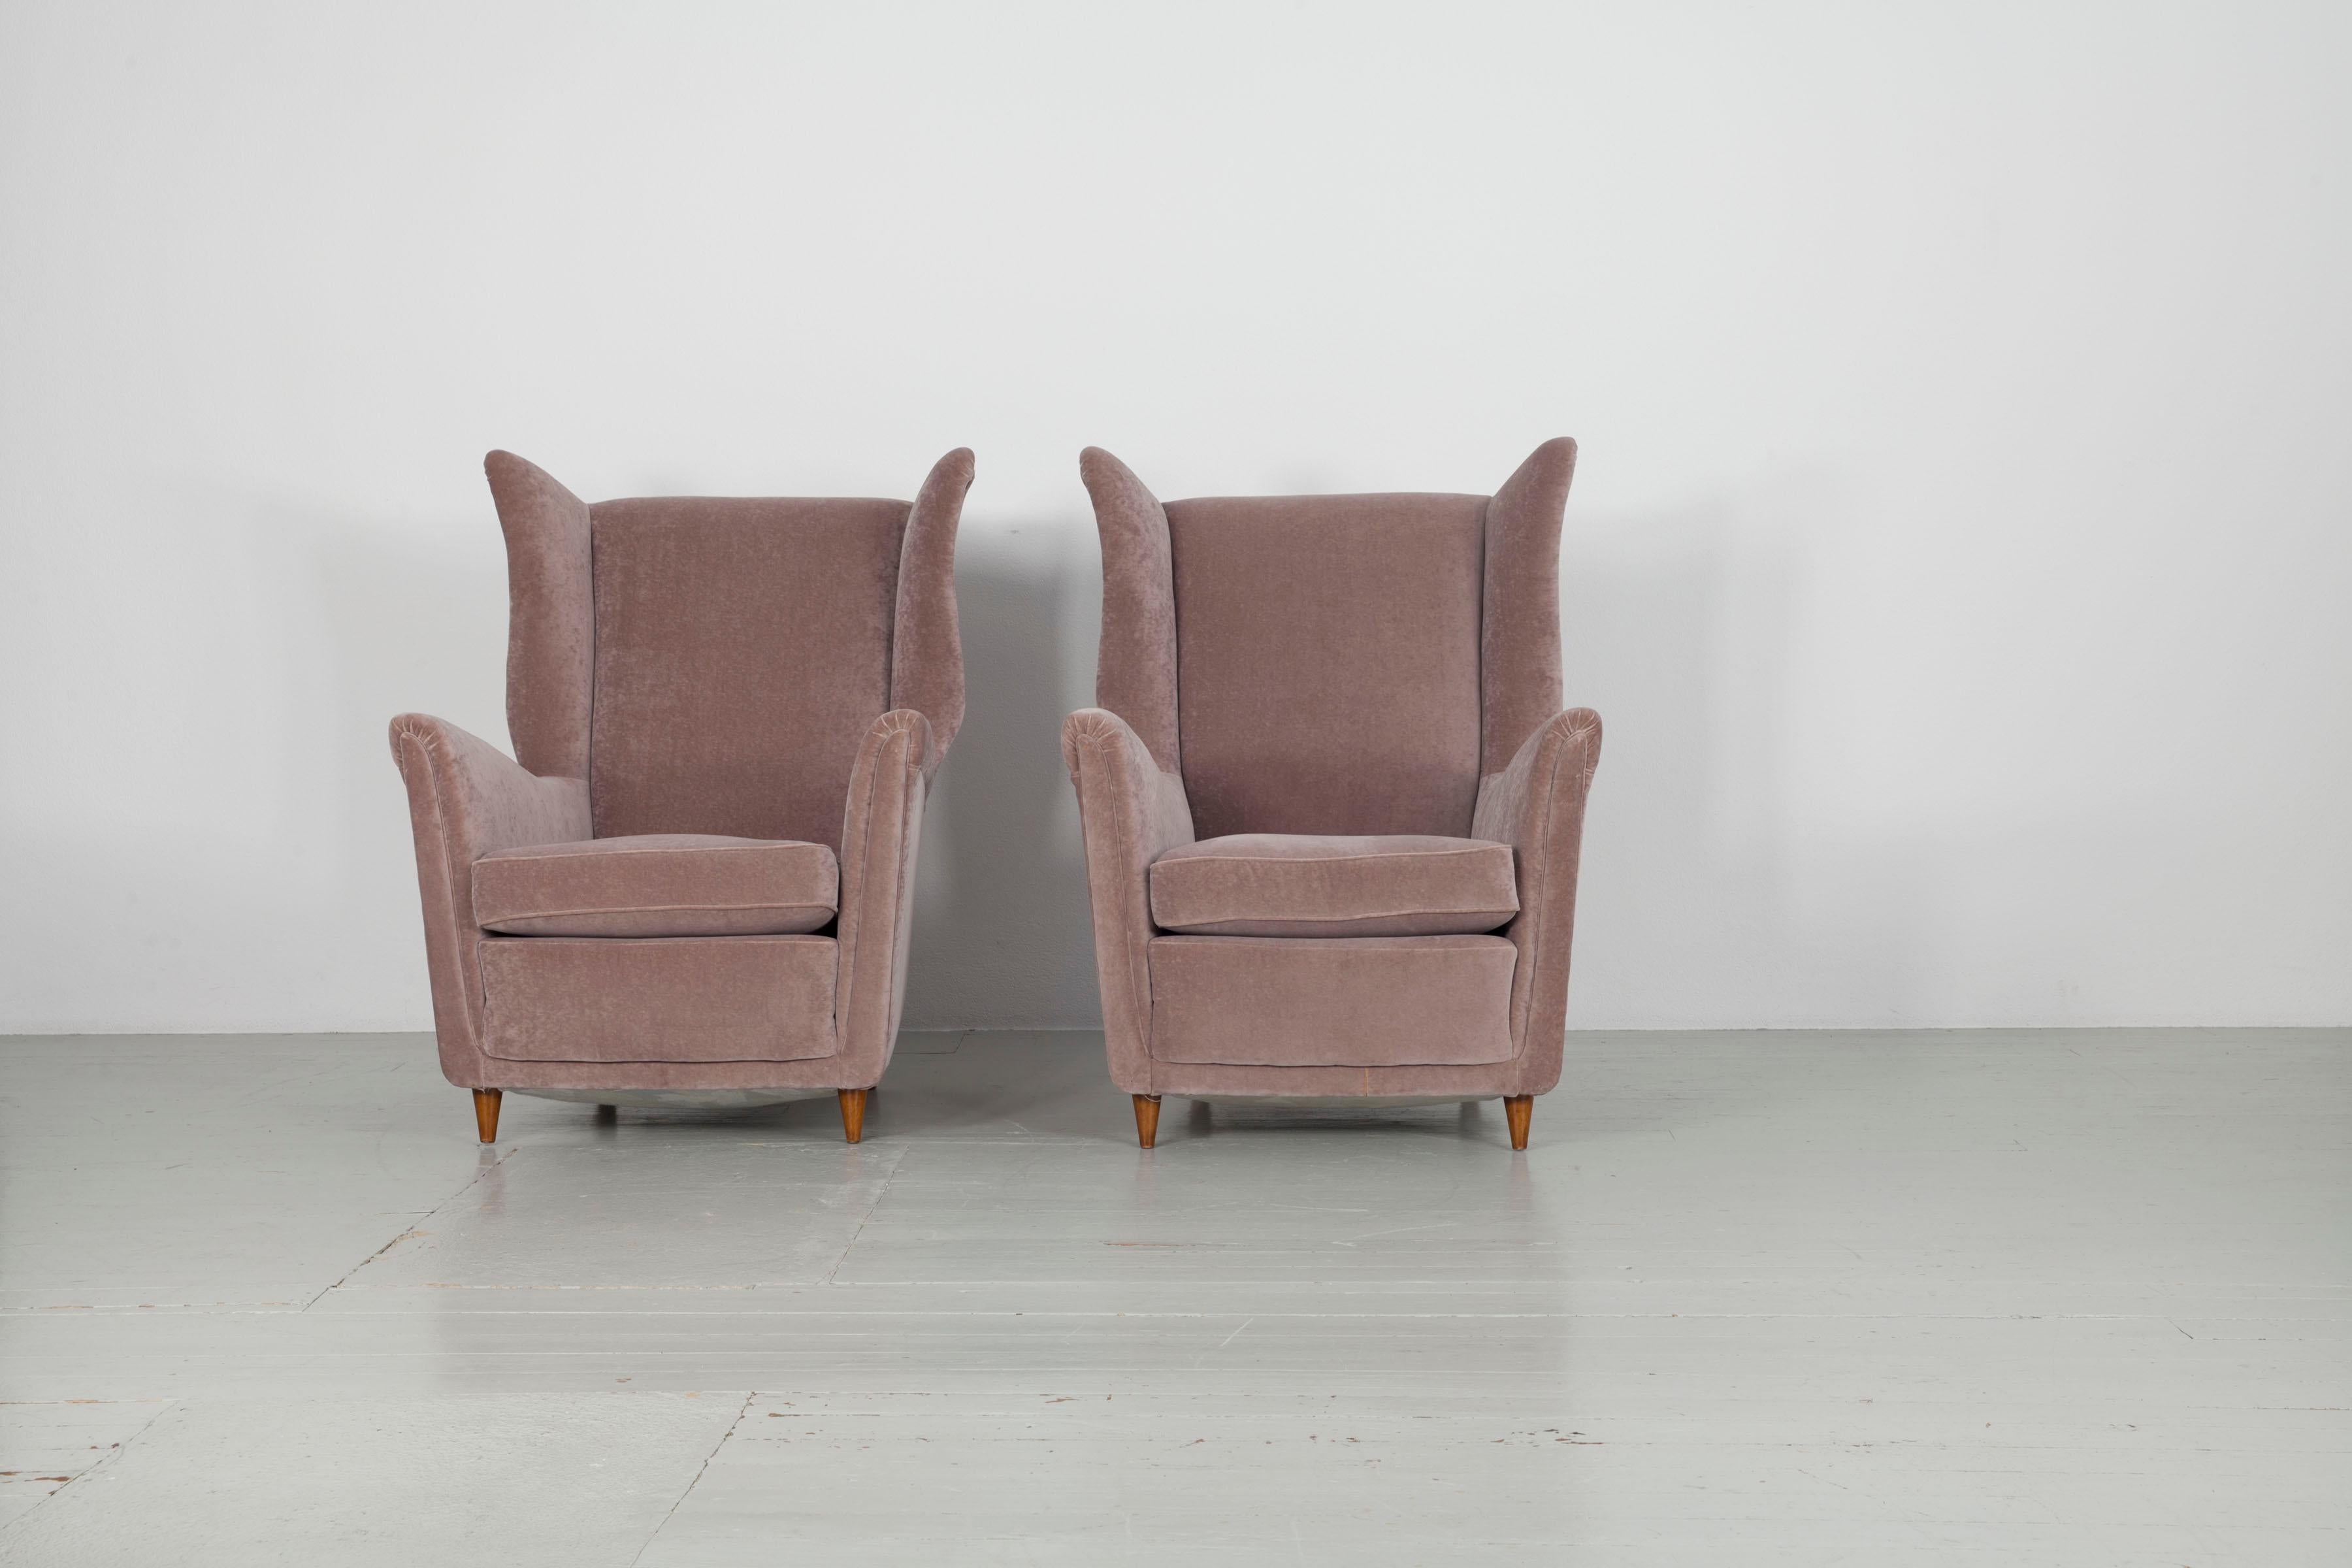 Pair of wing chairs from the 1950s. 
Design: Melchiorre Bega. 
Frame and legs of wood, upholstered parts covered with velvet. 

Letteratura: Domus 250 (settembre 1950) Irene de Guttry, Maria Paola Maino, il mobile italiano degli anni '40 e '50,